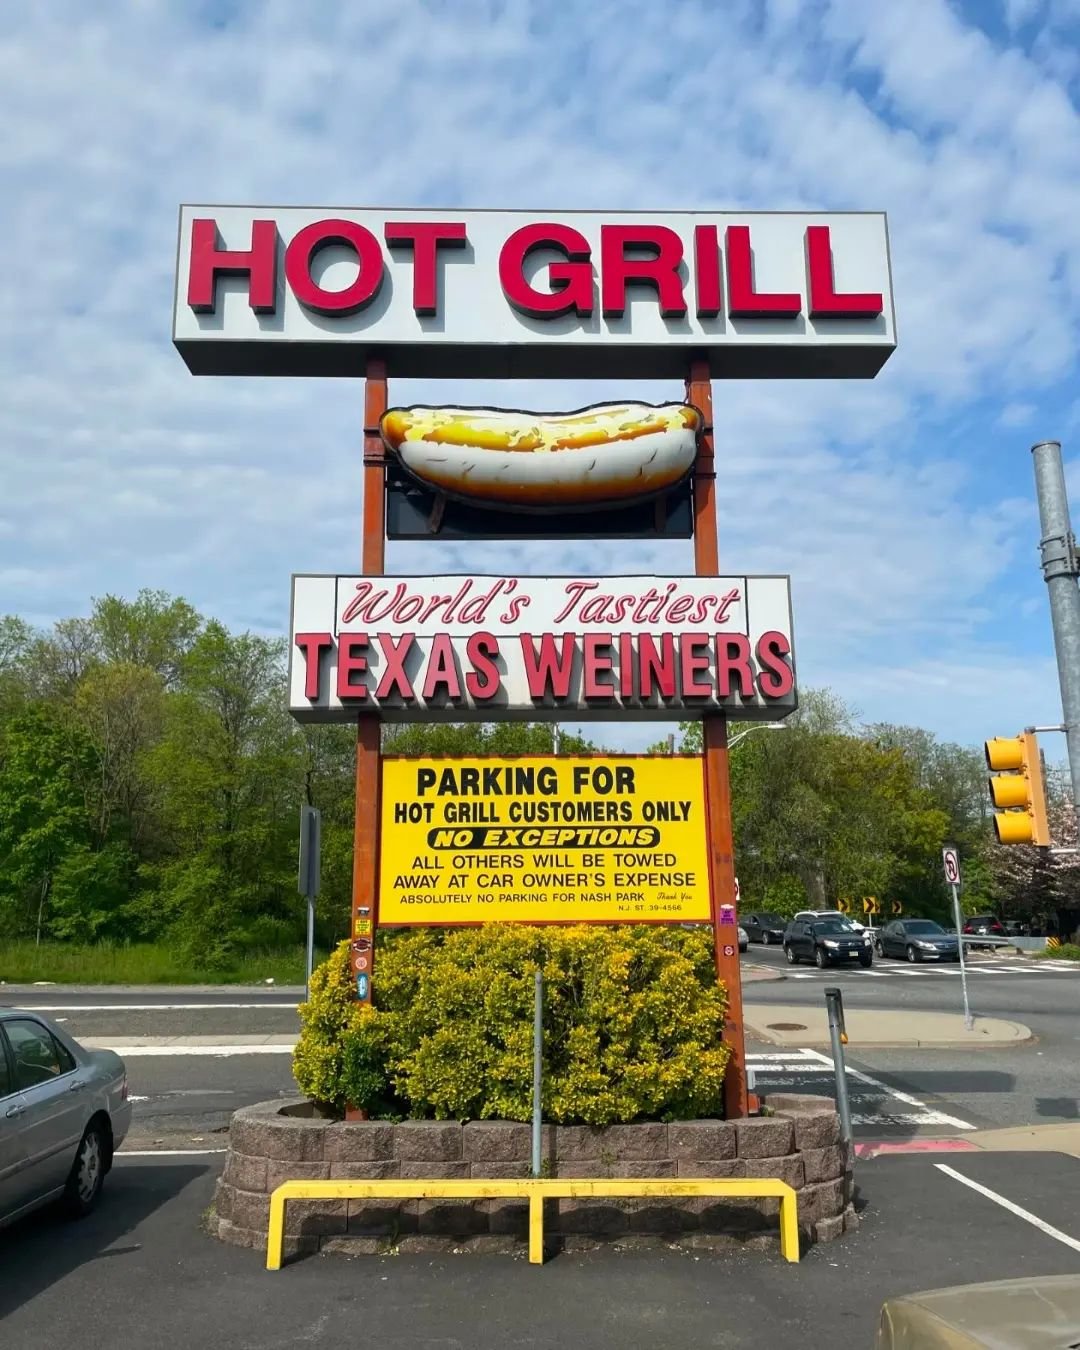 Thanks for stopping by The Hot Grill, Rob! 

#thehotgrillofficial #thehotgrillclifton #669lexingtonave
#cliftonnj #worldstastiesttexasweiners #onealltheway

Reposted from @robthomas9190